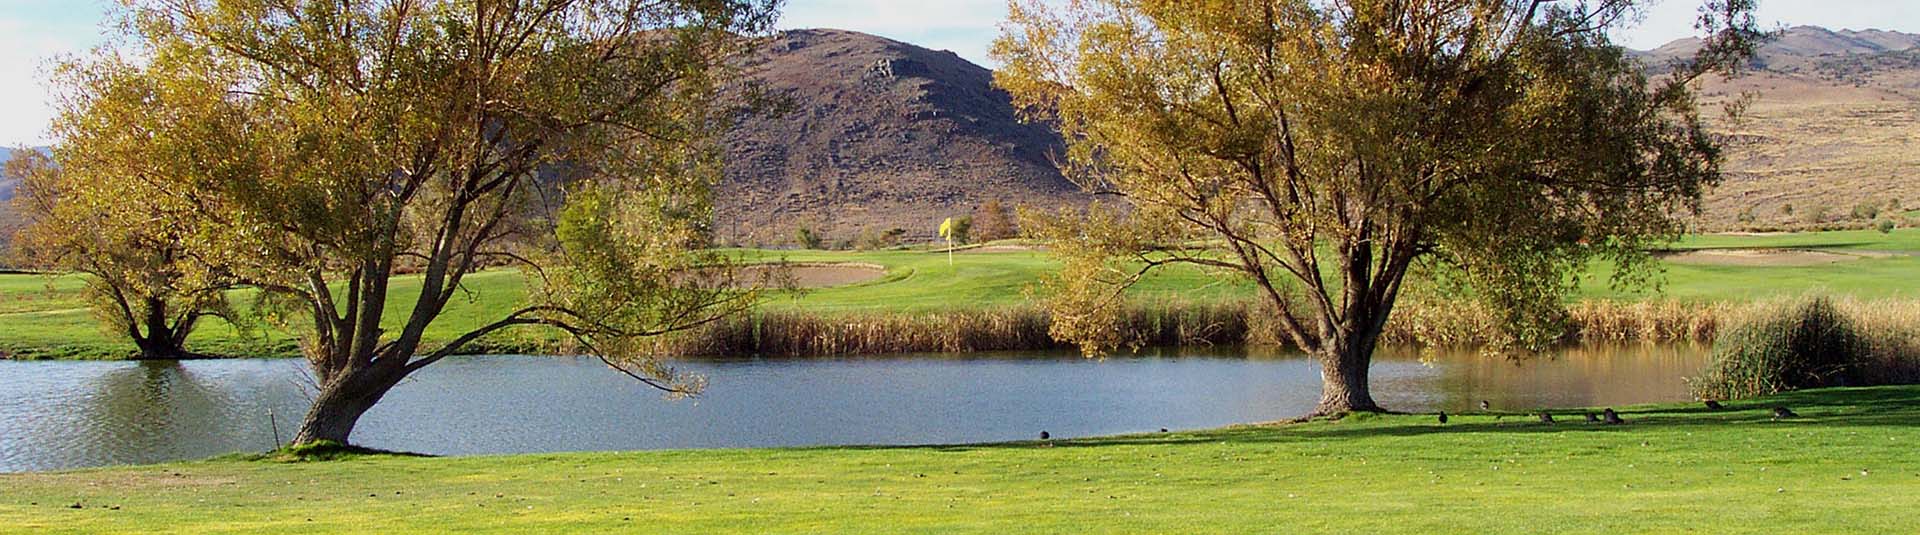 view of river on course with mountains